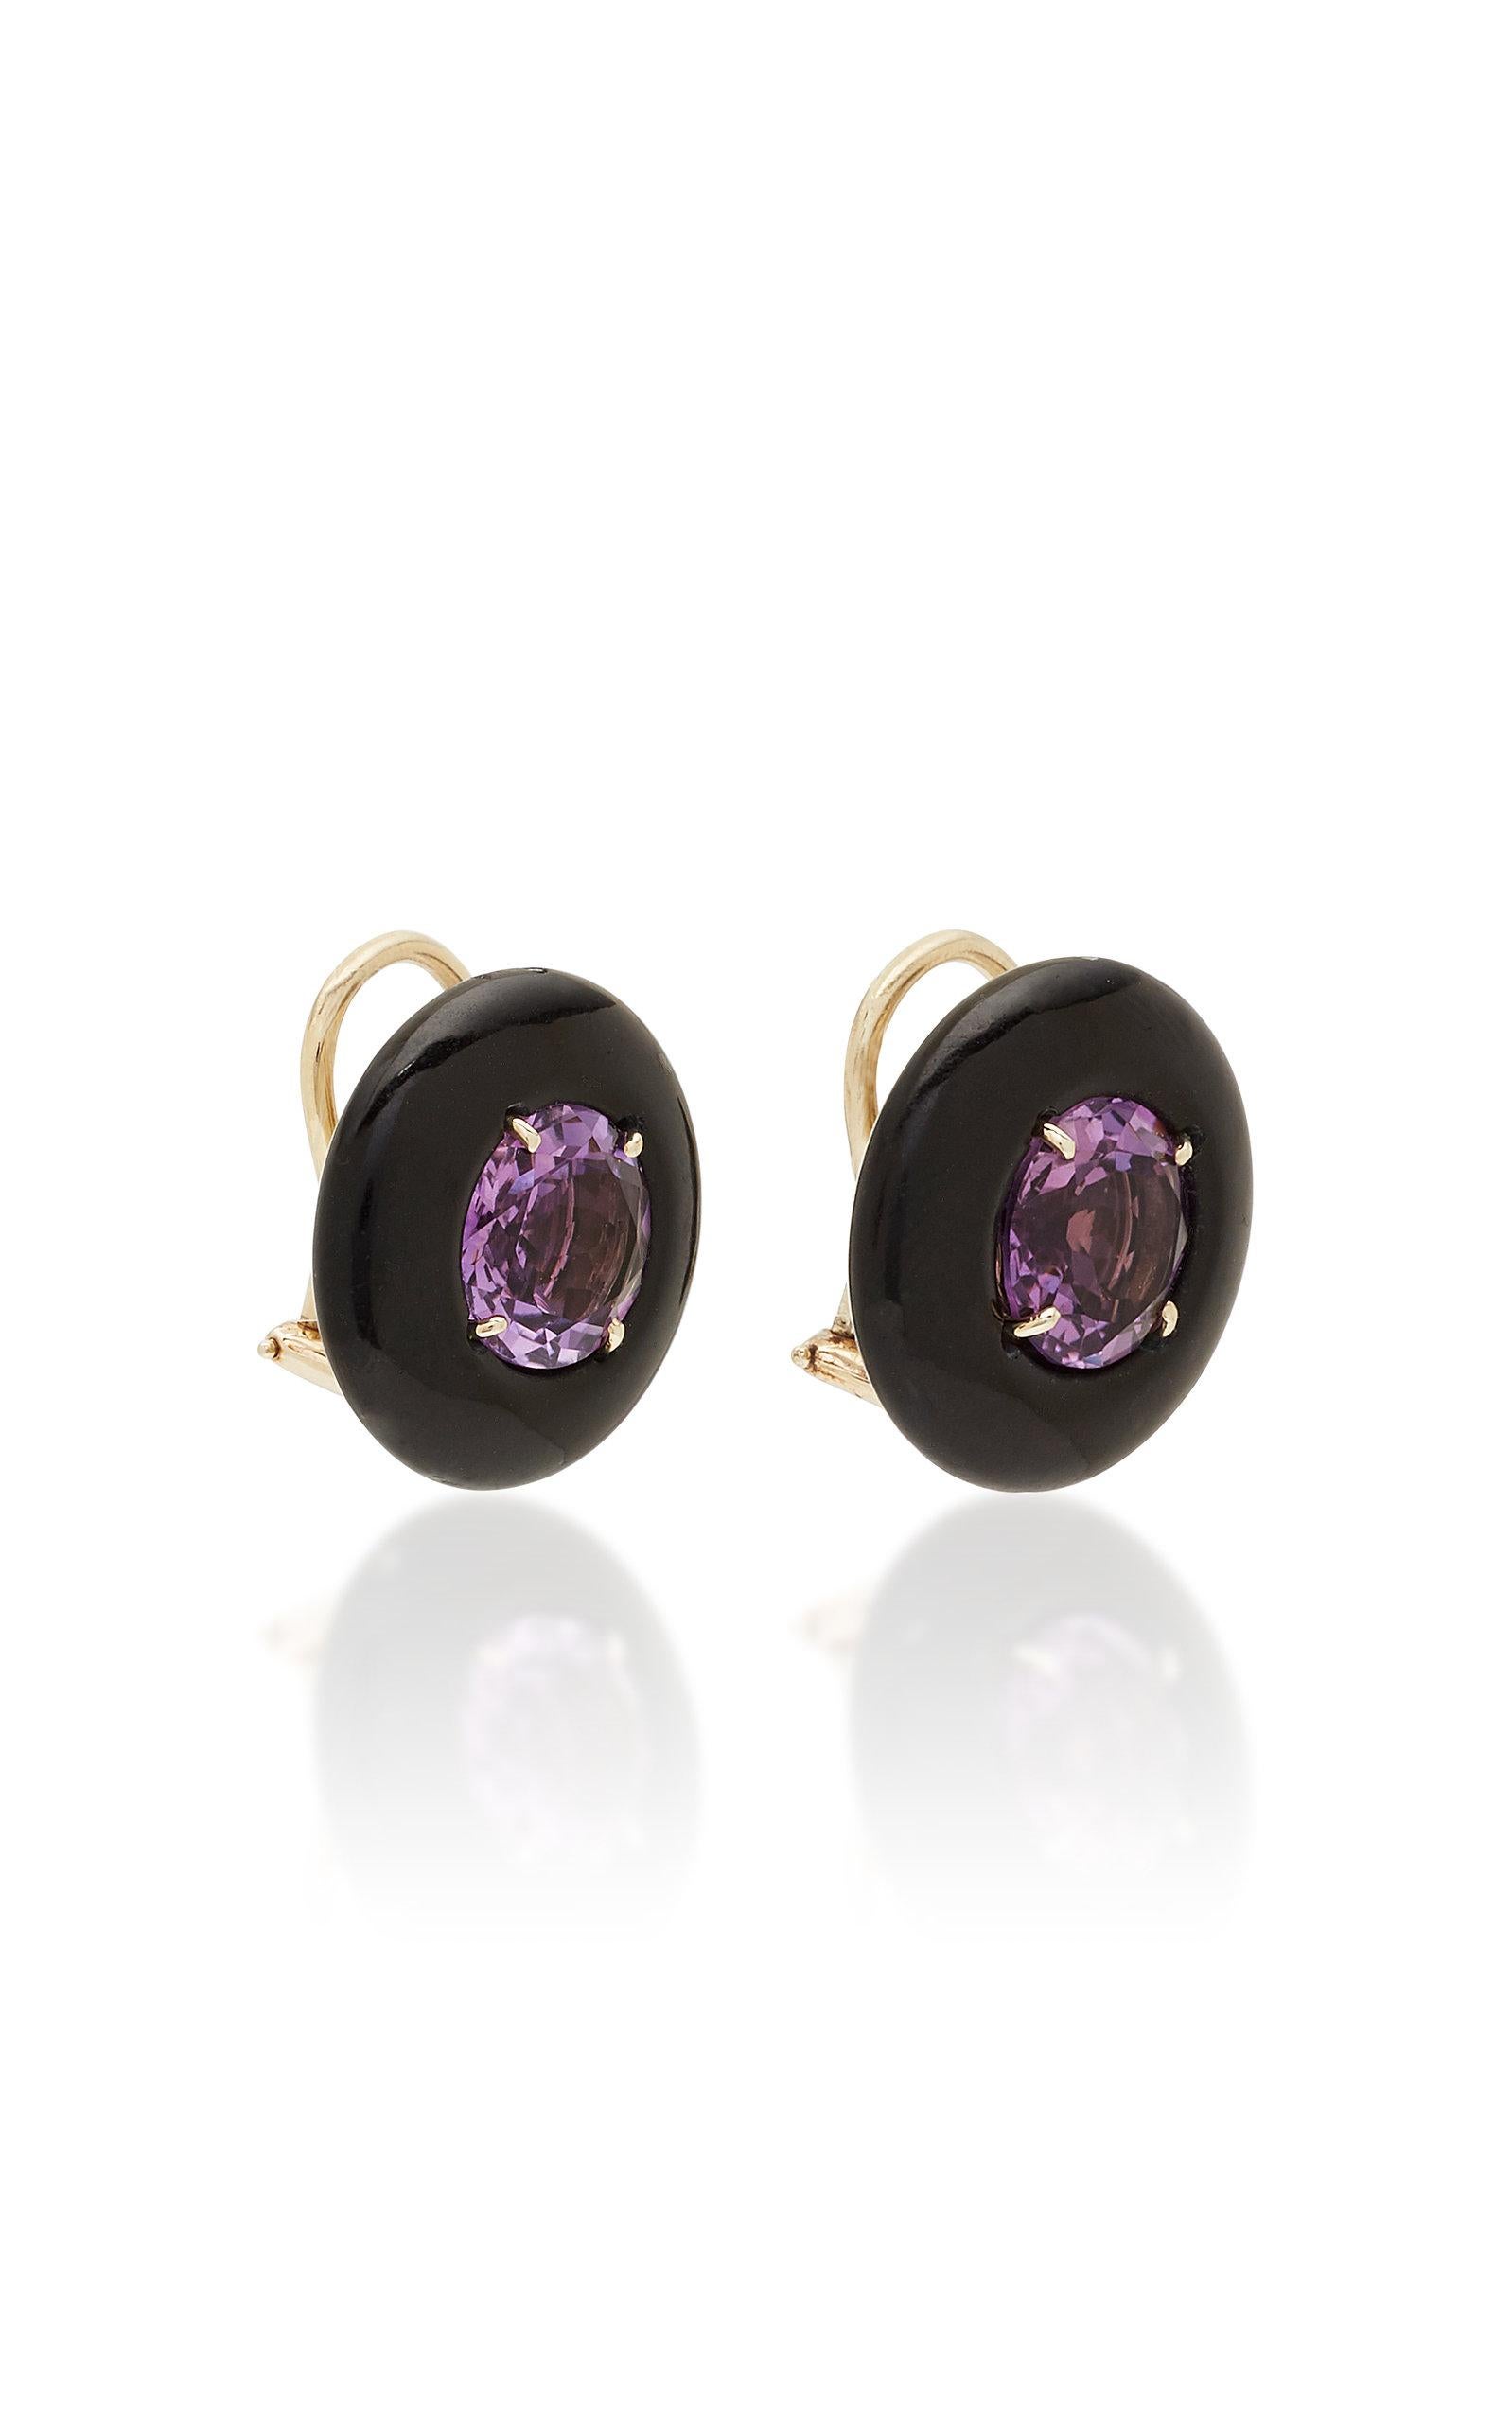 Contemporary Sorab & Roshi Black Onyx Button Earrings with Faceted Amethyst Center For Sale